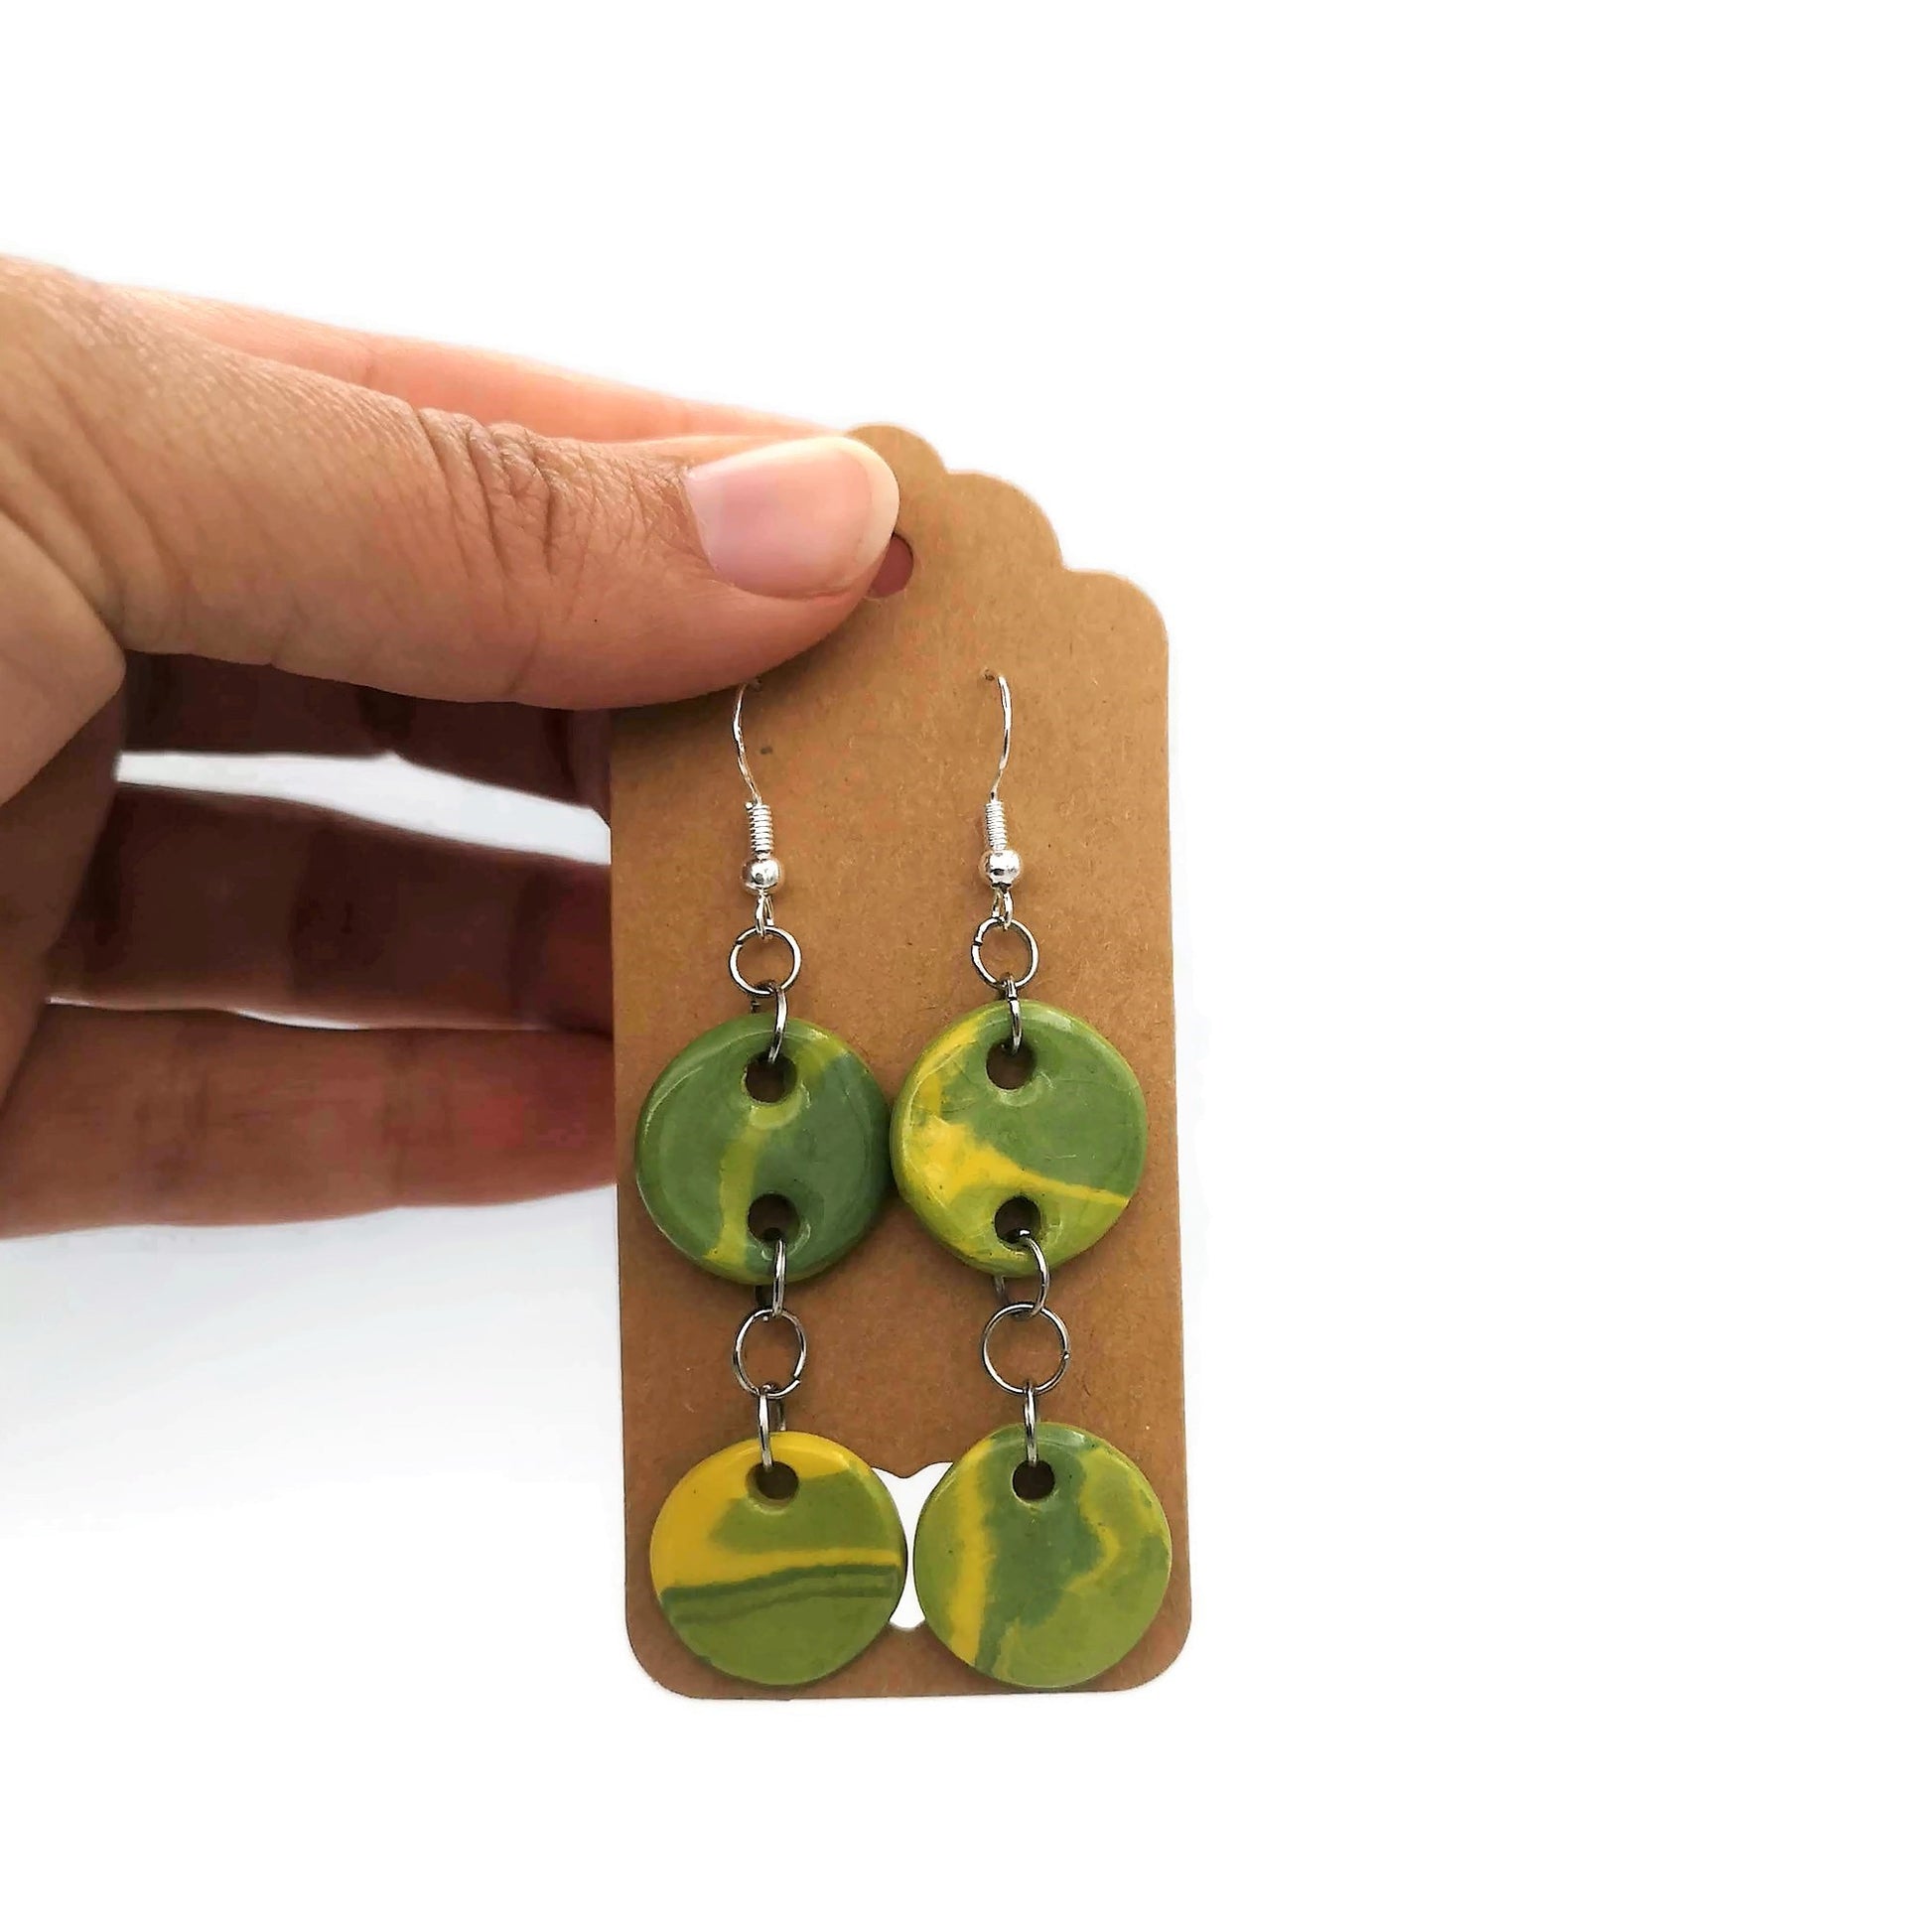 Statement Earrings Dangle Clay Earrings, Handmade Ceramic Aesthetic Earrings, Dangle Earrings For Mom Birthday Gift From Daughter - Ceramica Ana Rafael